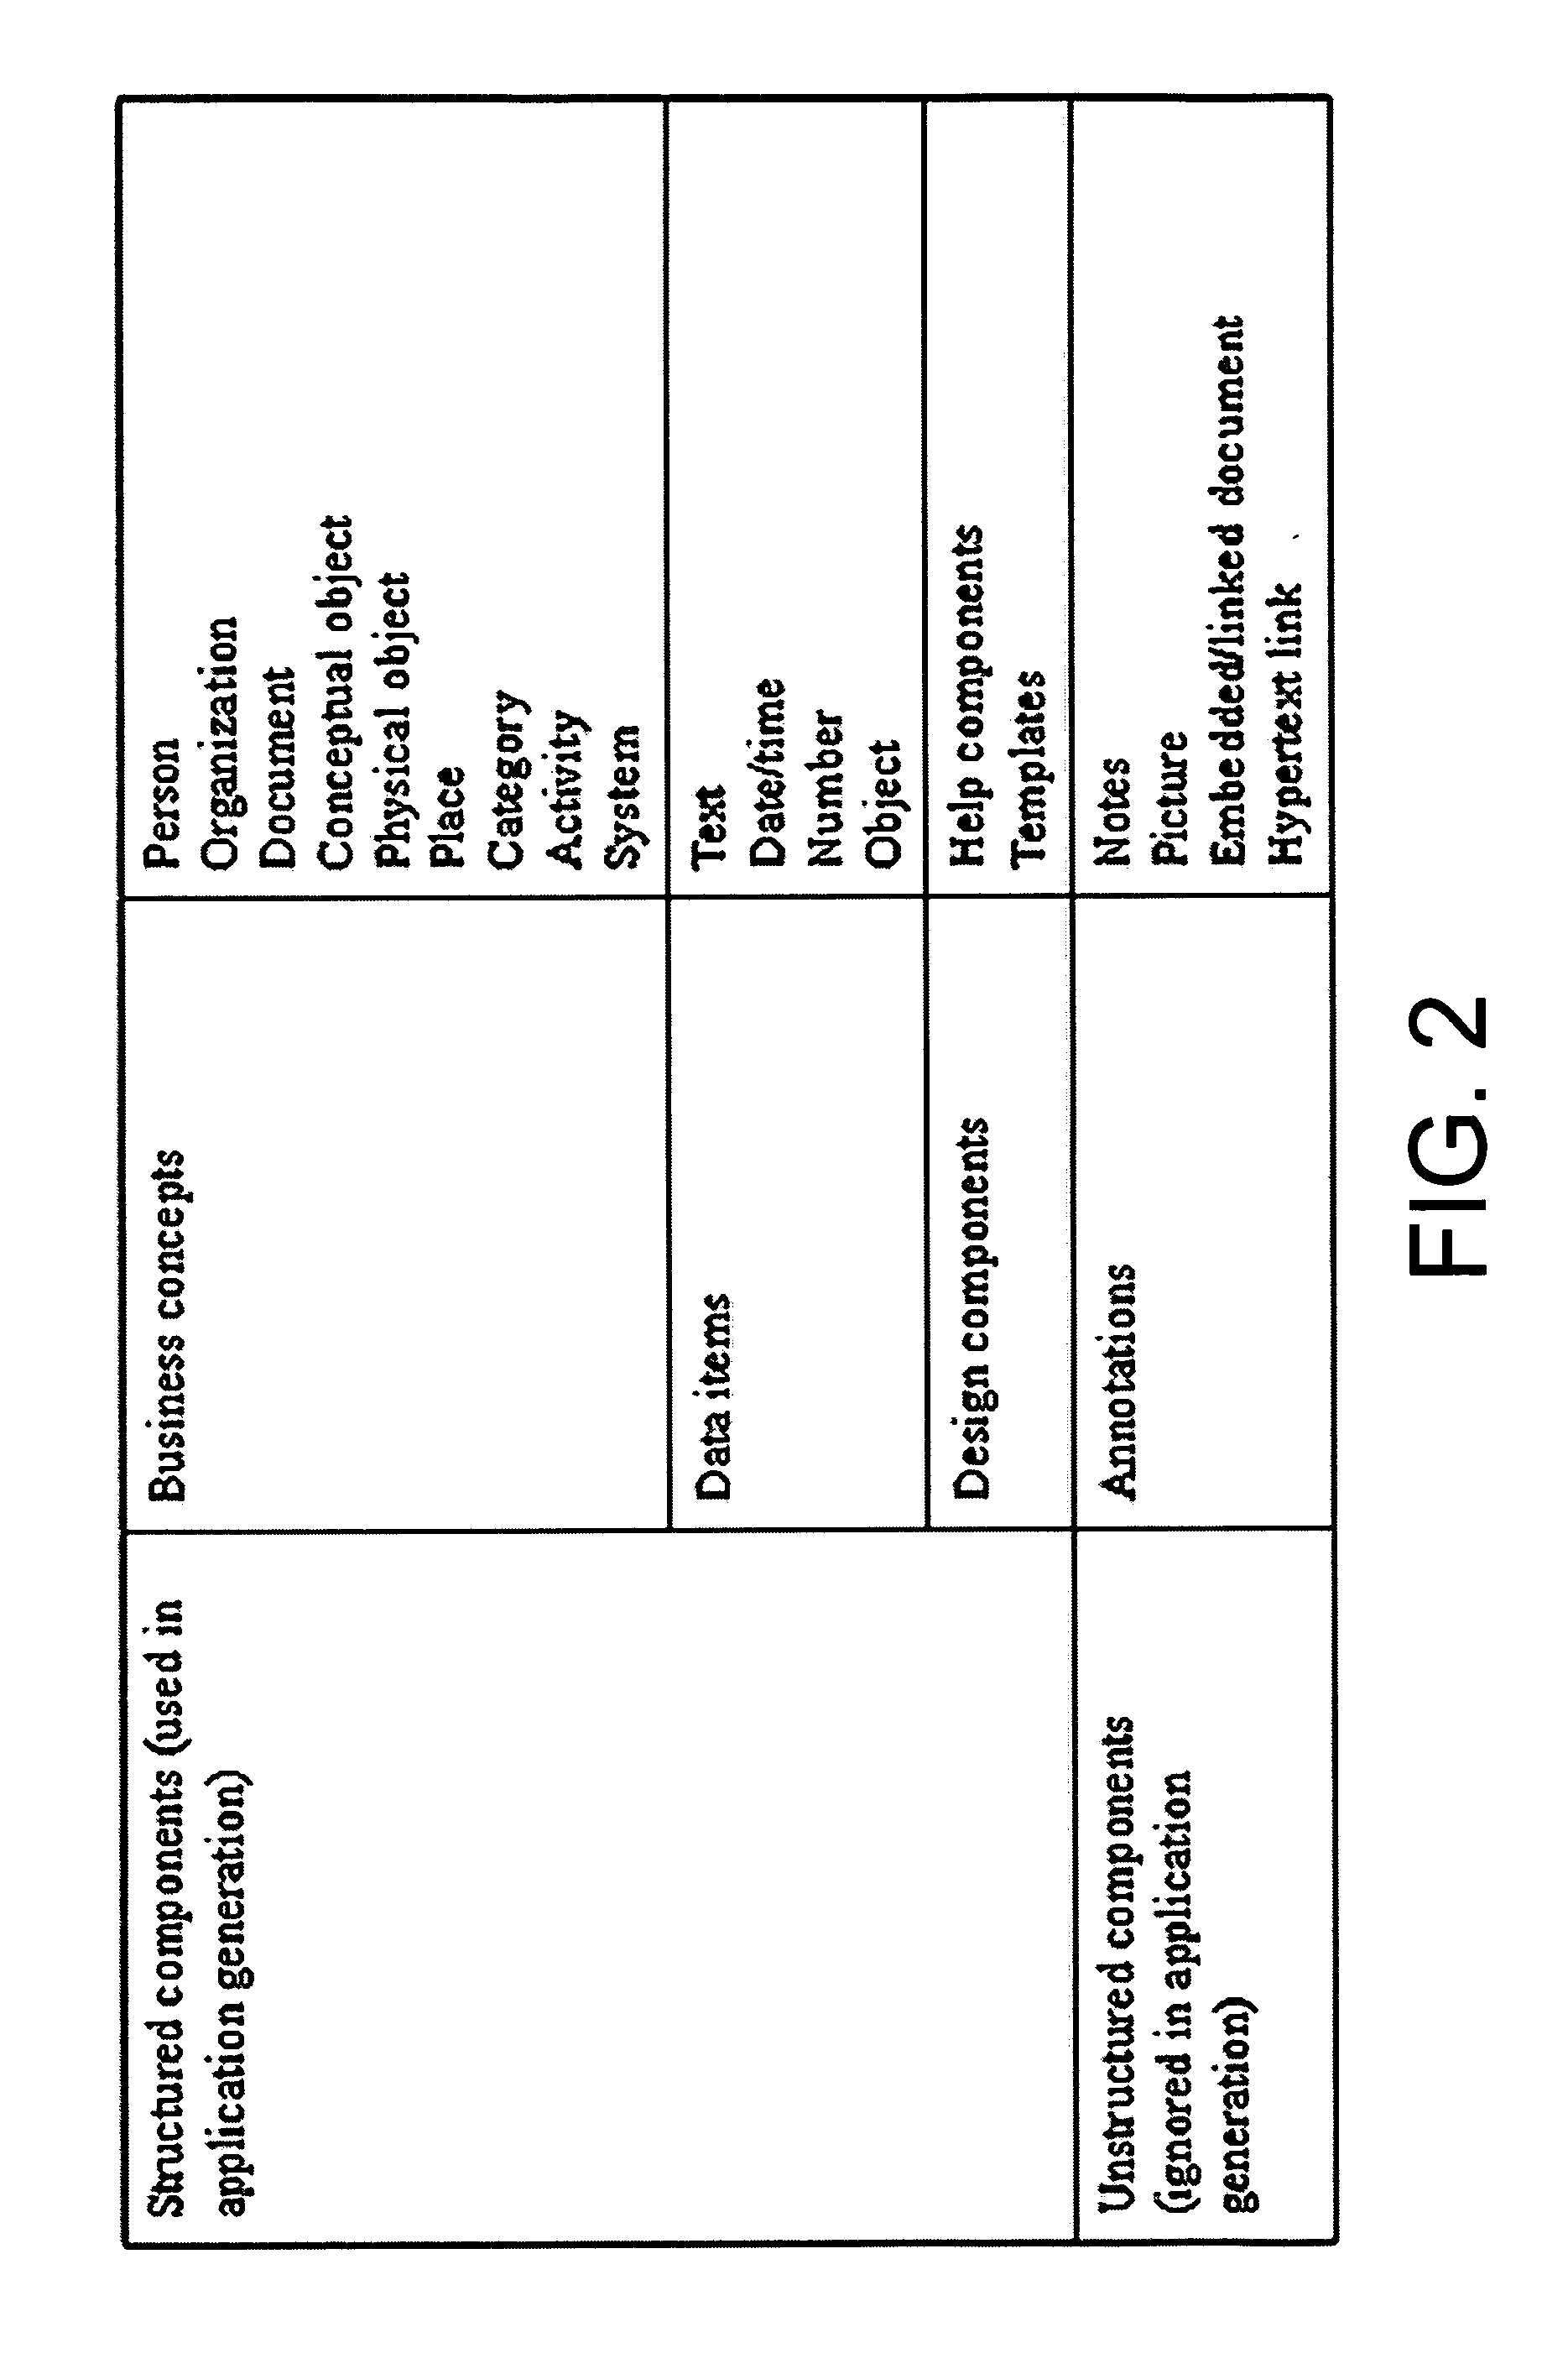 Systems and methods for software based on business concepts